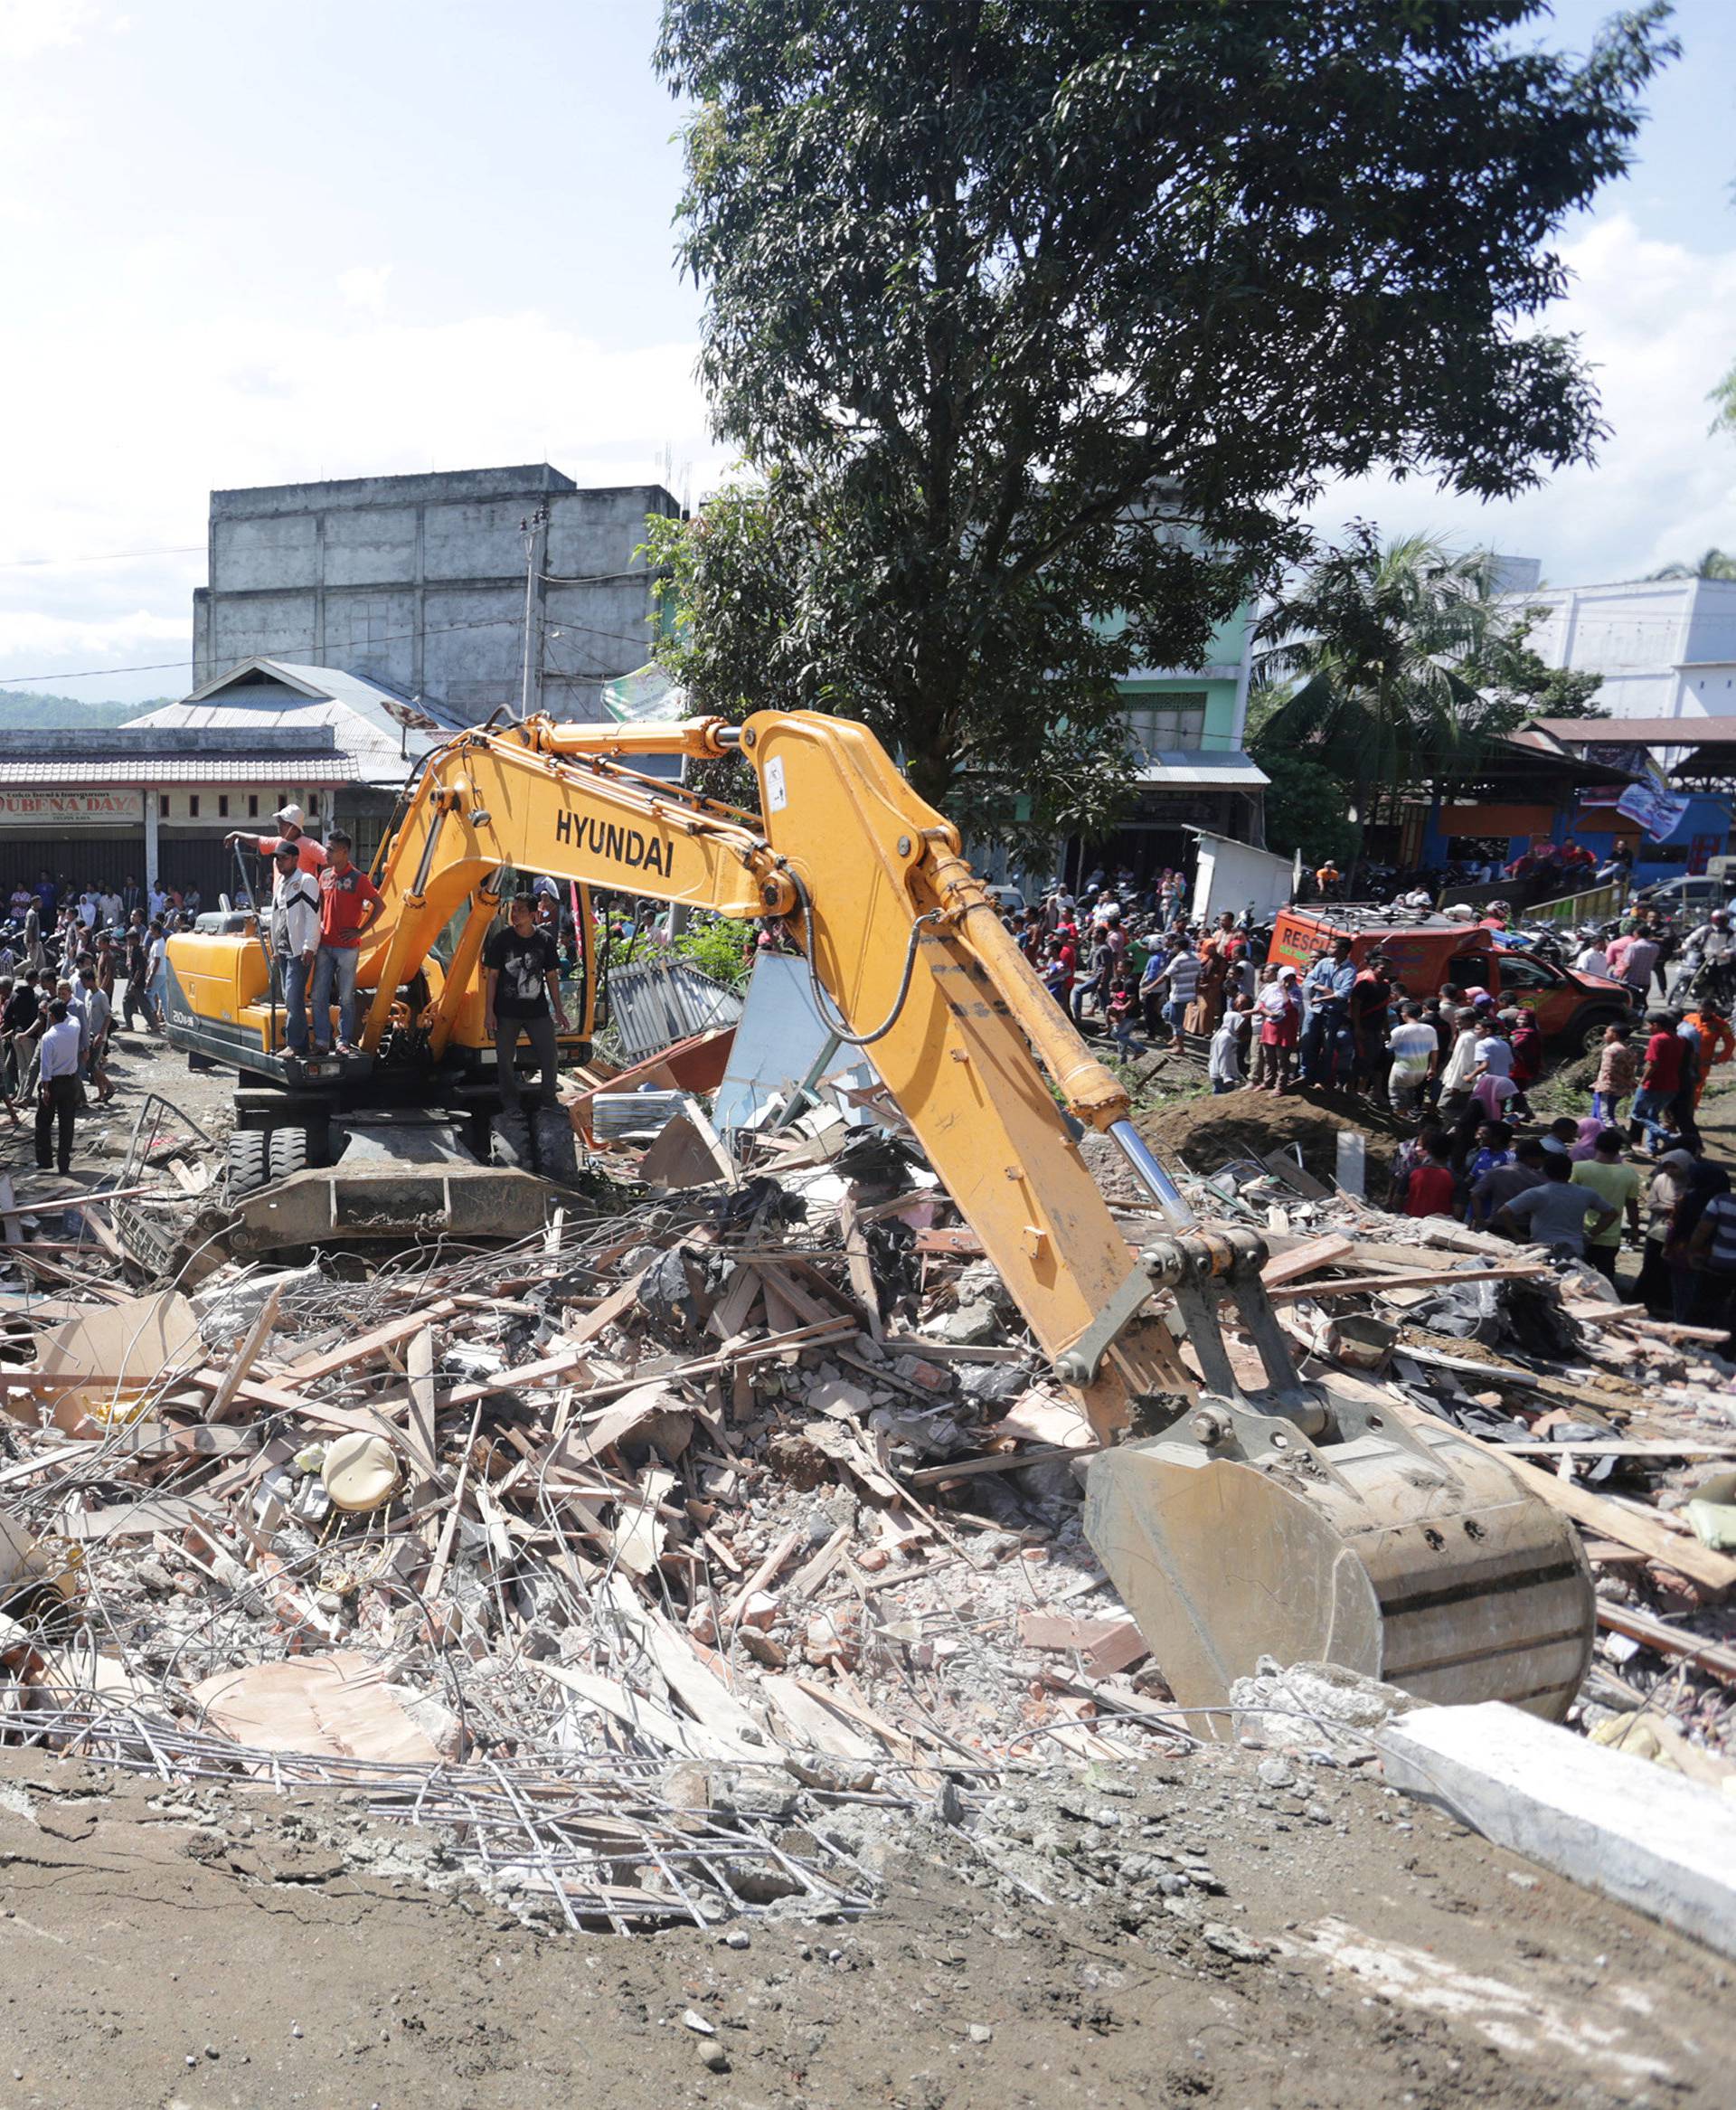 Rescue workers use heavy equipment to search for victims in a collapsed building following an earthquake in Lueng Putu, Pidie Jaya in the northern province of Aceh